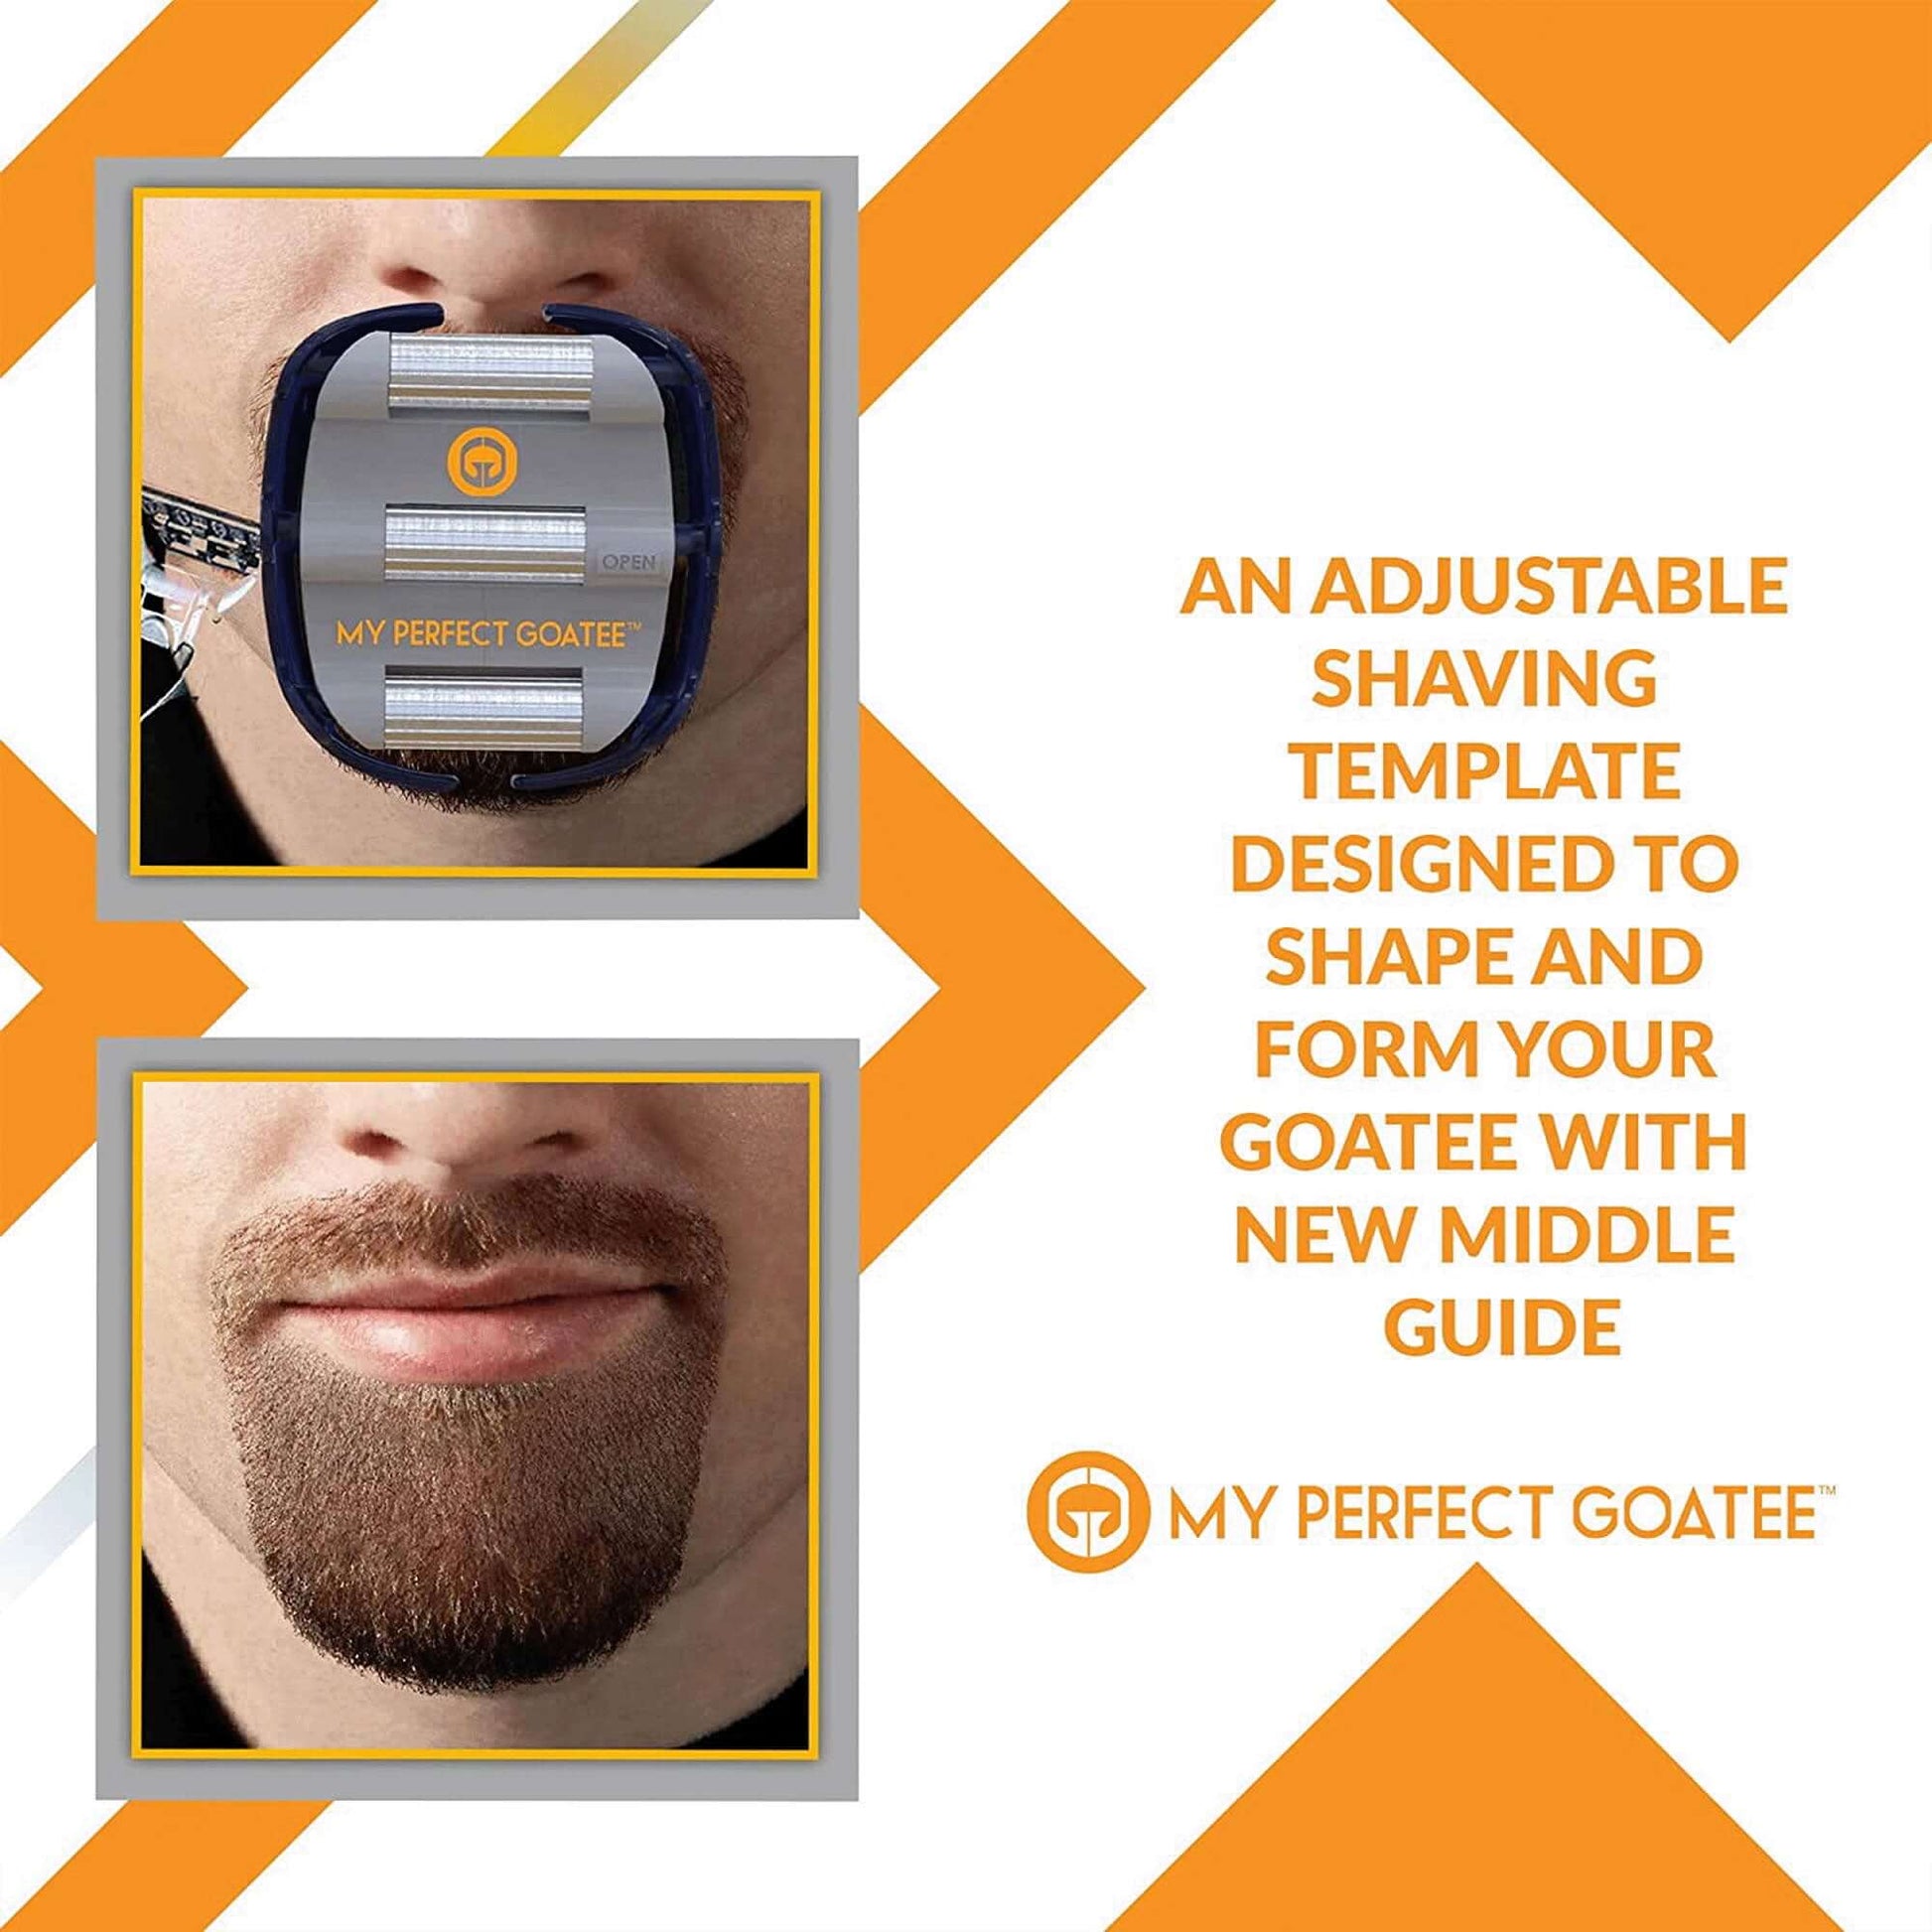 An adjustable shaving template designed to shape and form your goatee with new middle guide